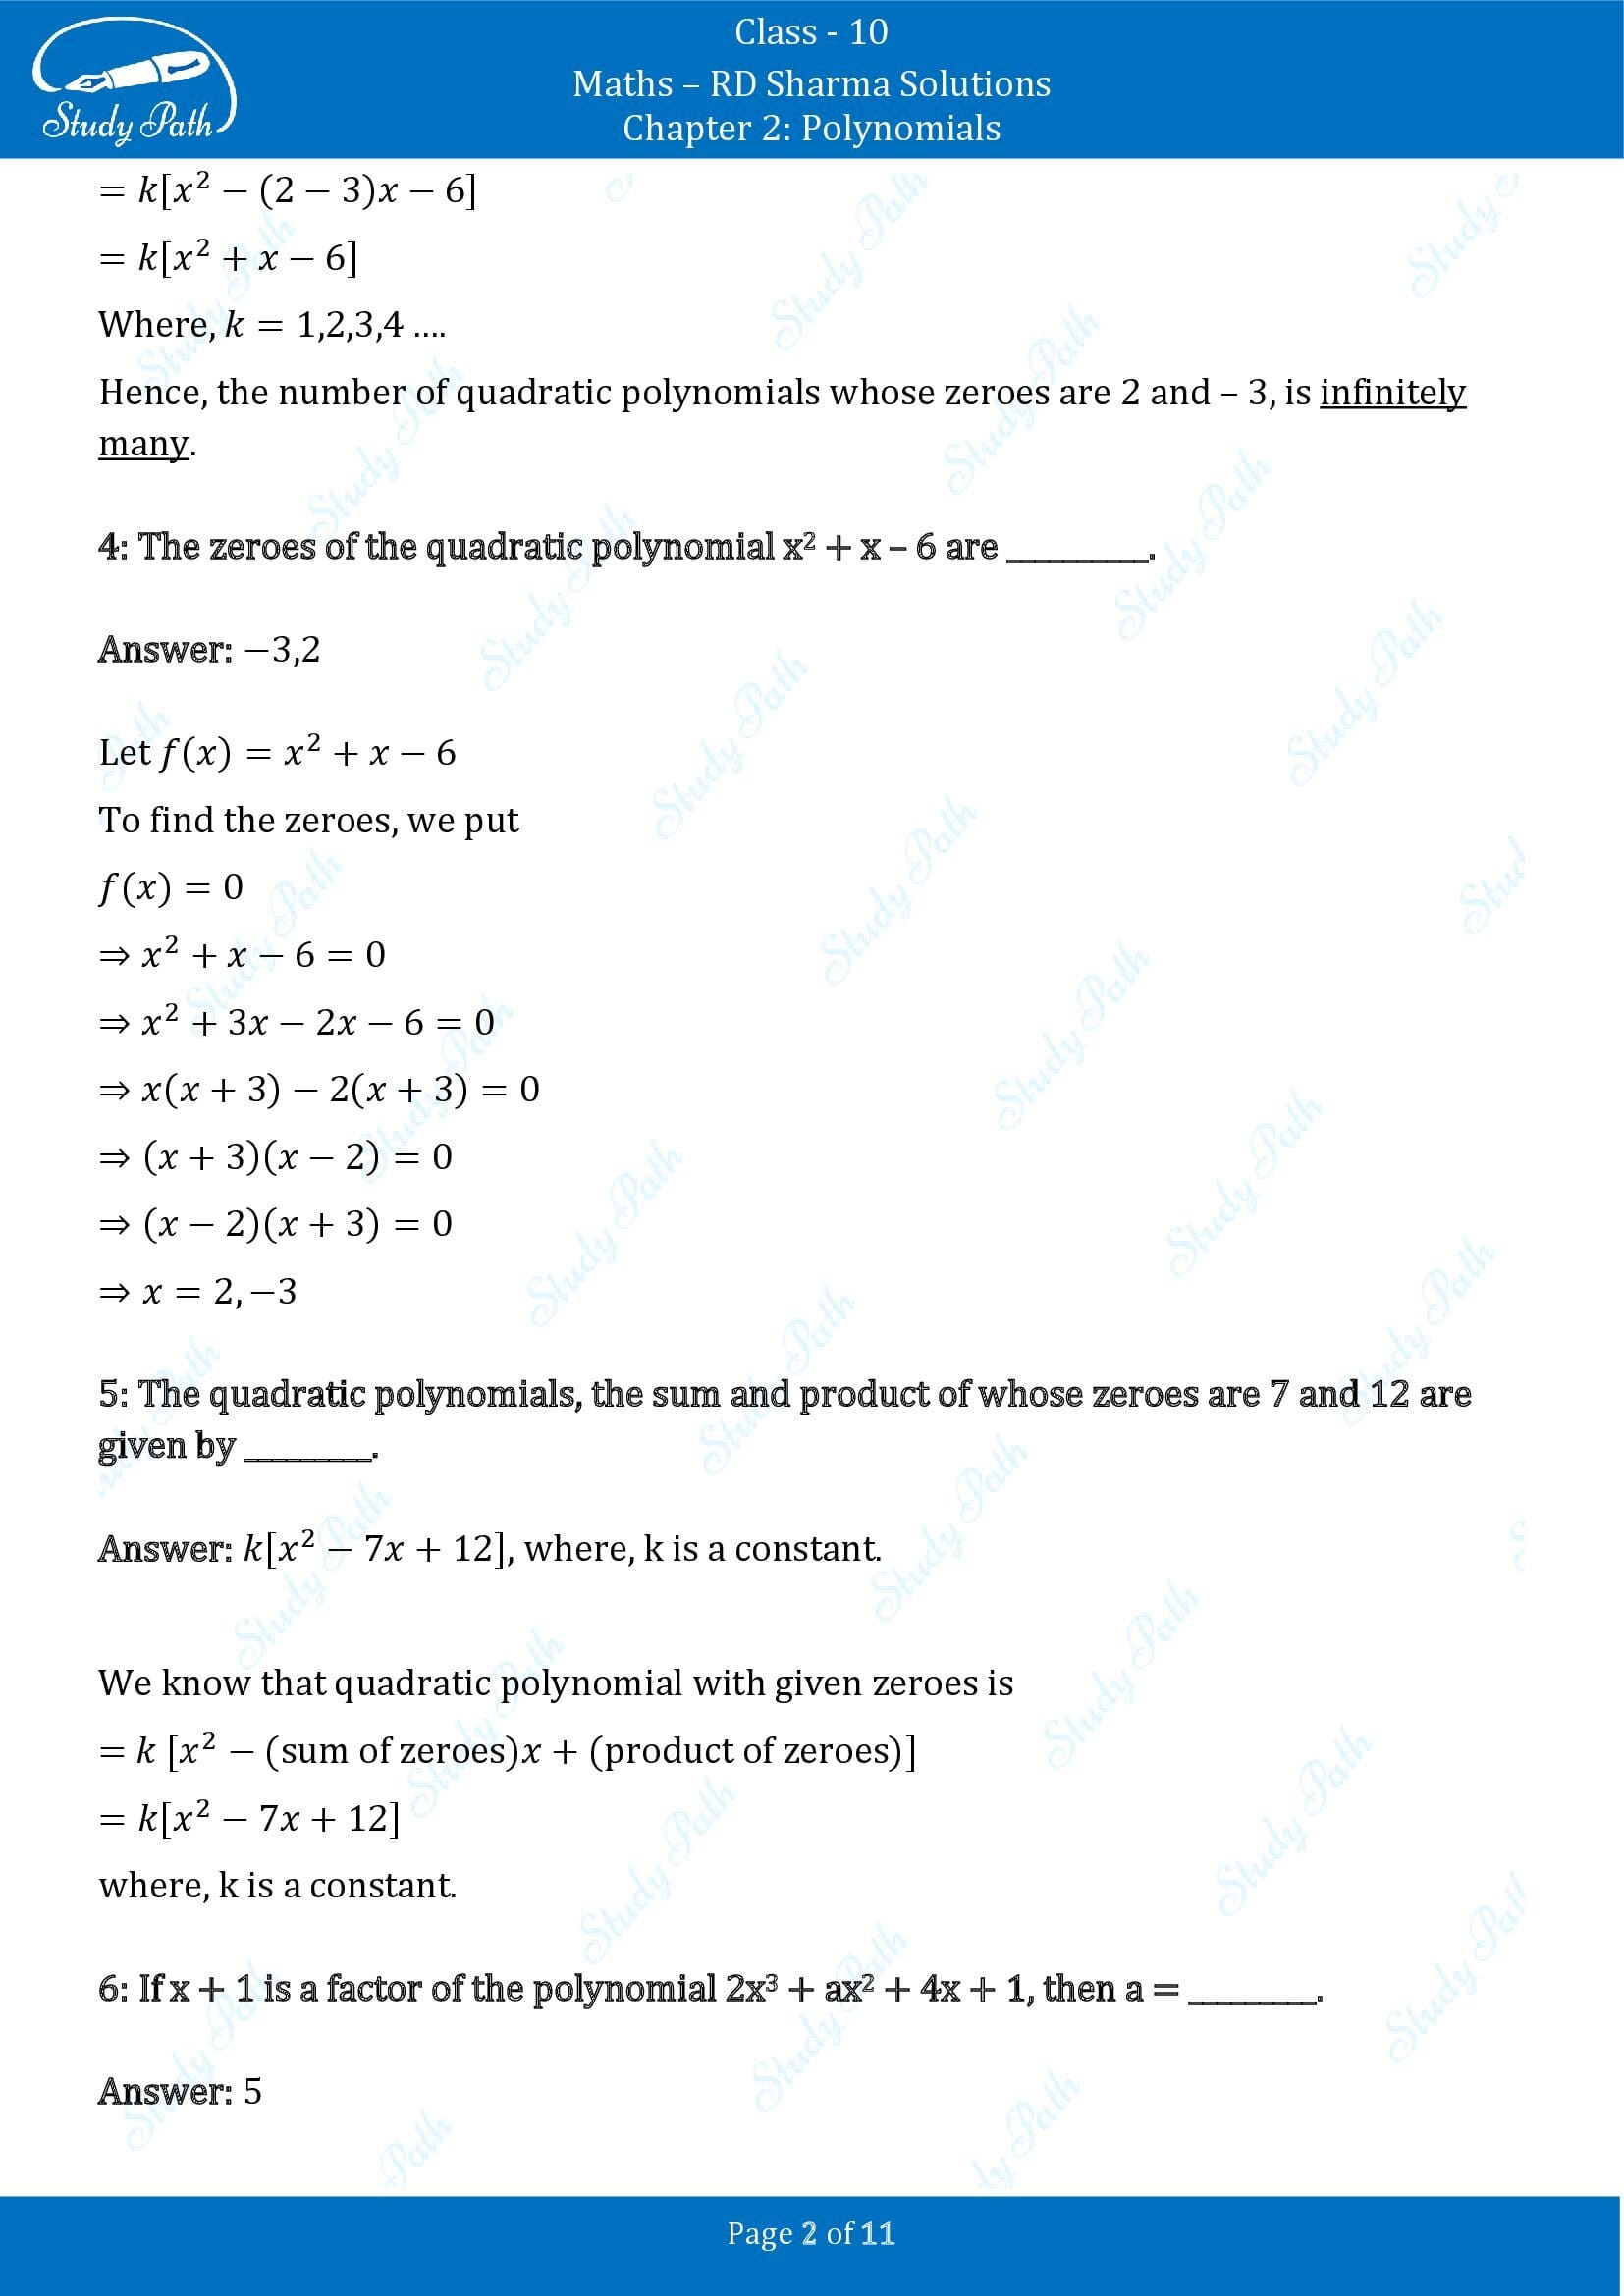 RD Sharma Solutions Class 10 Chapter 2 Polynomials Fill in the Blank Type Questions FBQs 00002